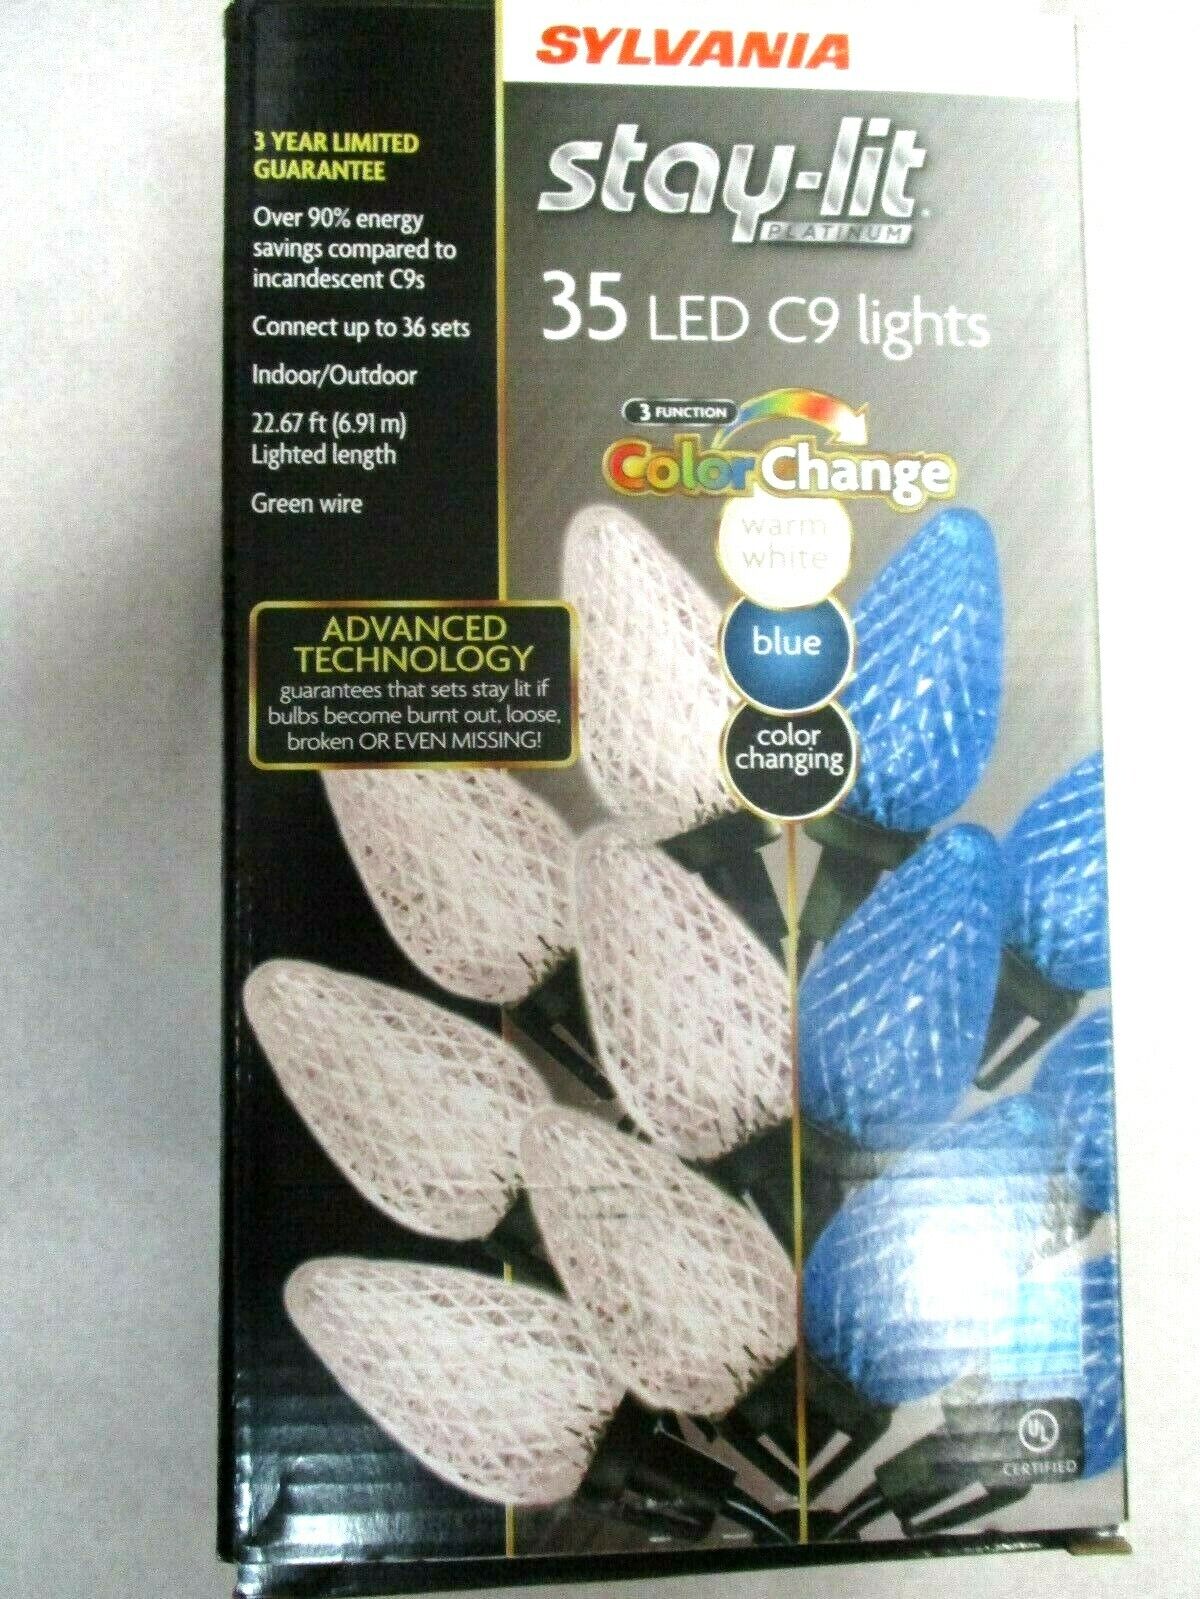 SYLVANIA STAY-LIT 35 C9 COLOR CHANGE WARM WHITE TO BLUE LED LIGHTS - NEW